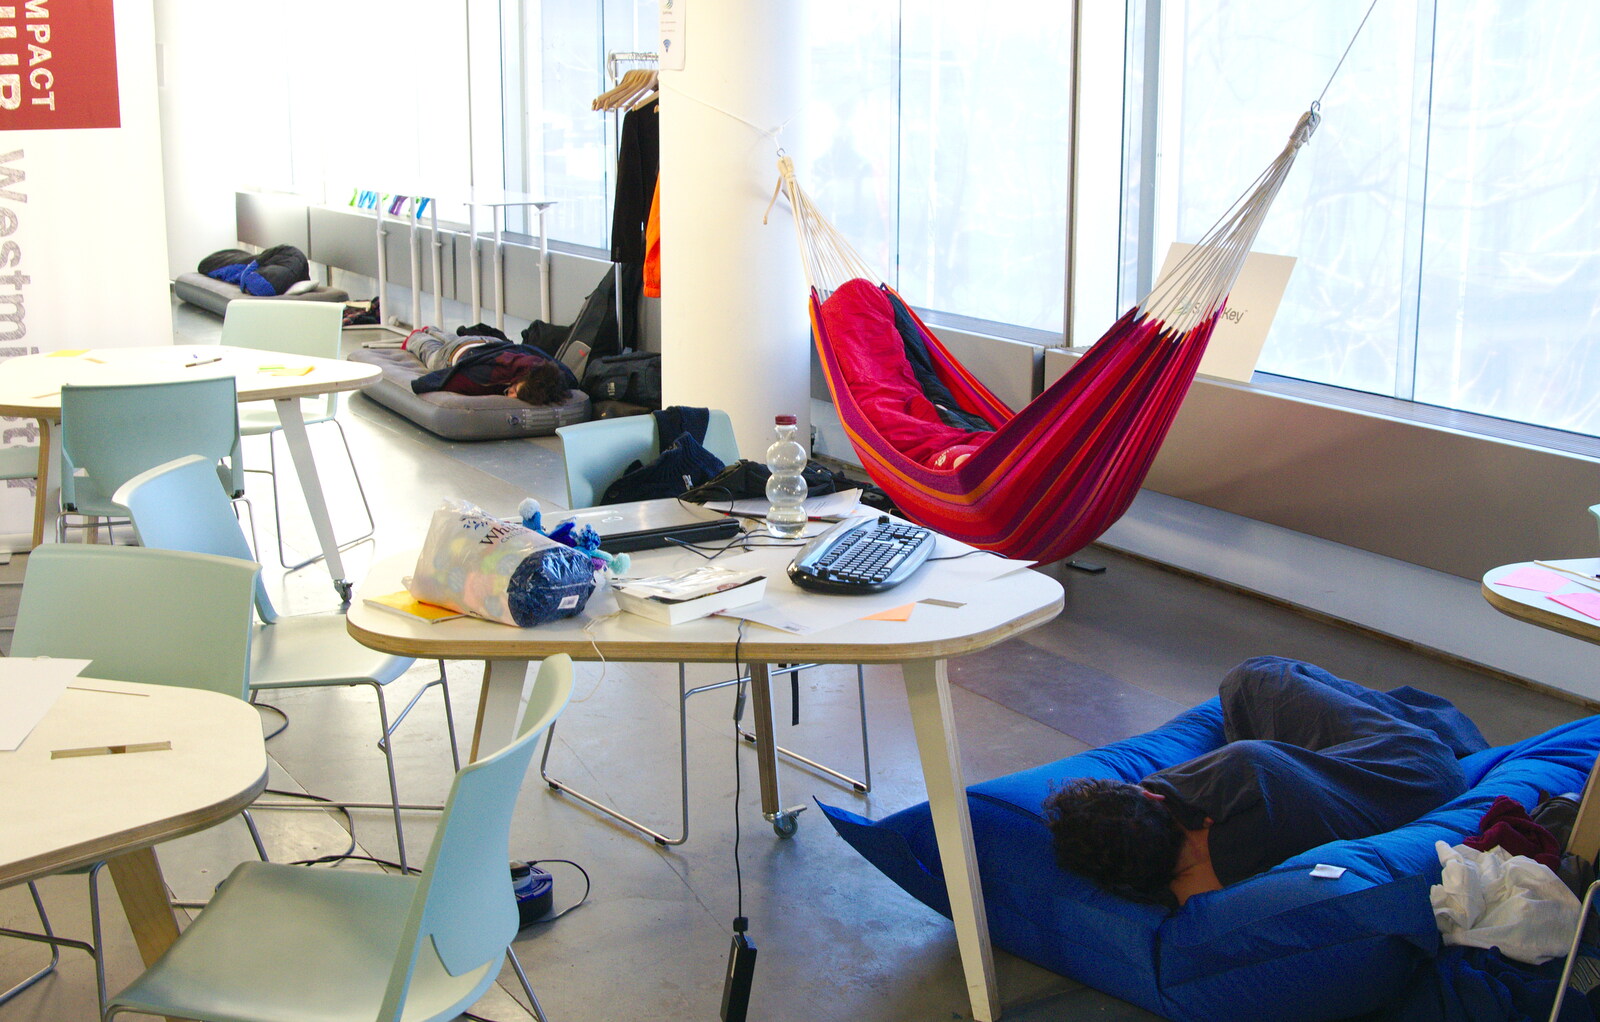 6.30am after a night on the floor (or hammock) from SwiftKey Innovation, The Hub, Westminster, London - 21st February 2014